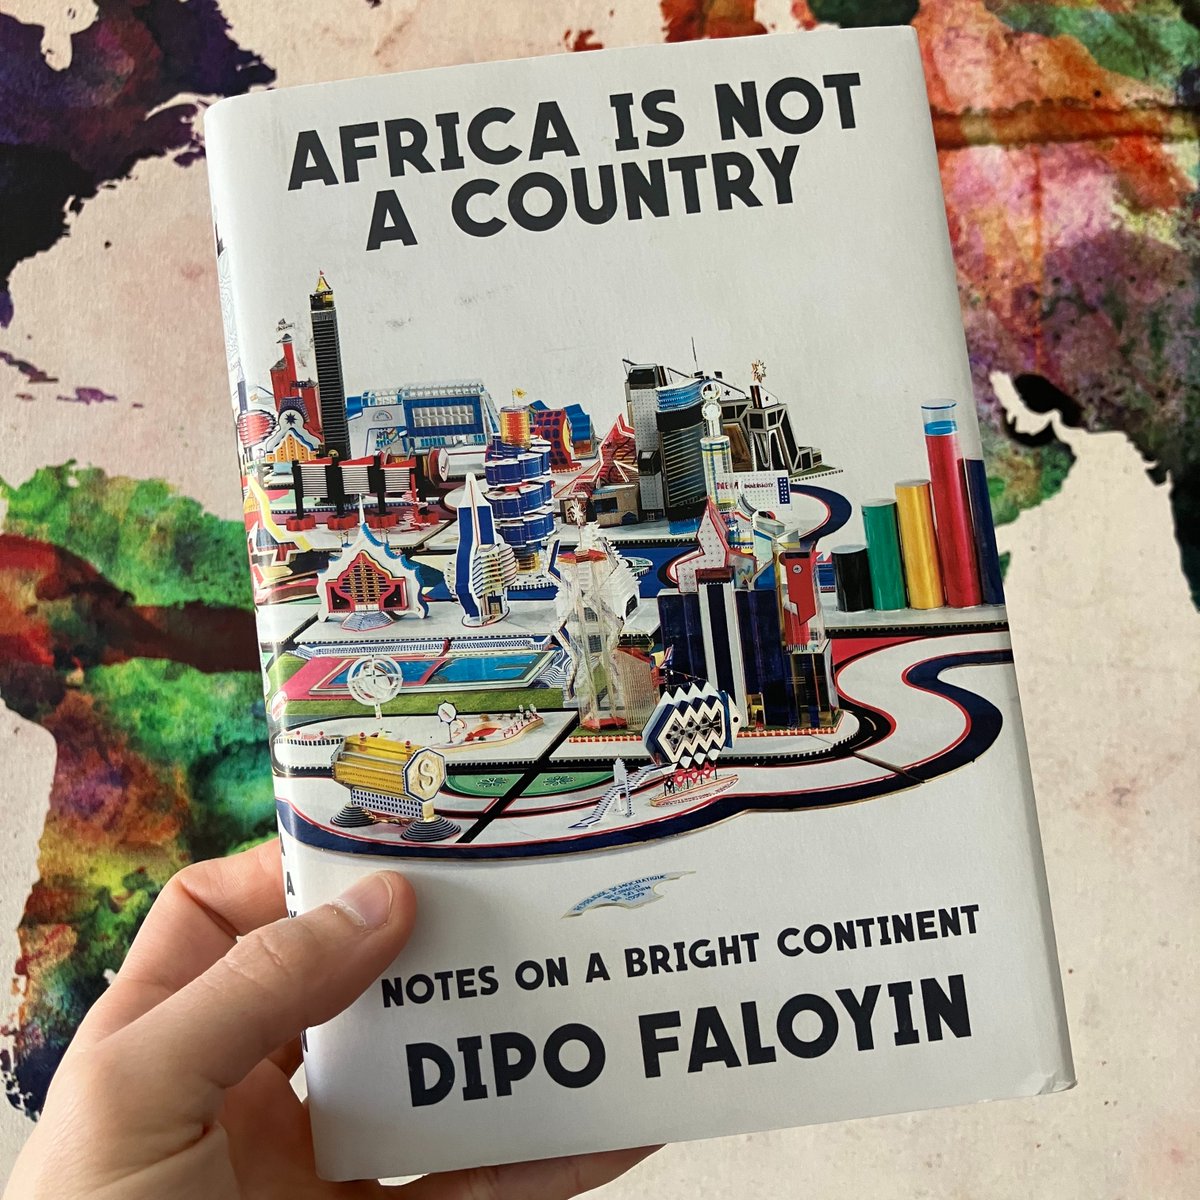 This #WorldBookDay, the (RED) team recommends @dipofaloyin’s “Africa is Not a Country,” which presents educational and entertaining insight into Africa's rich diversity, communities, and histories.